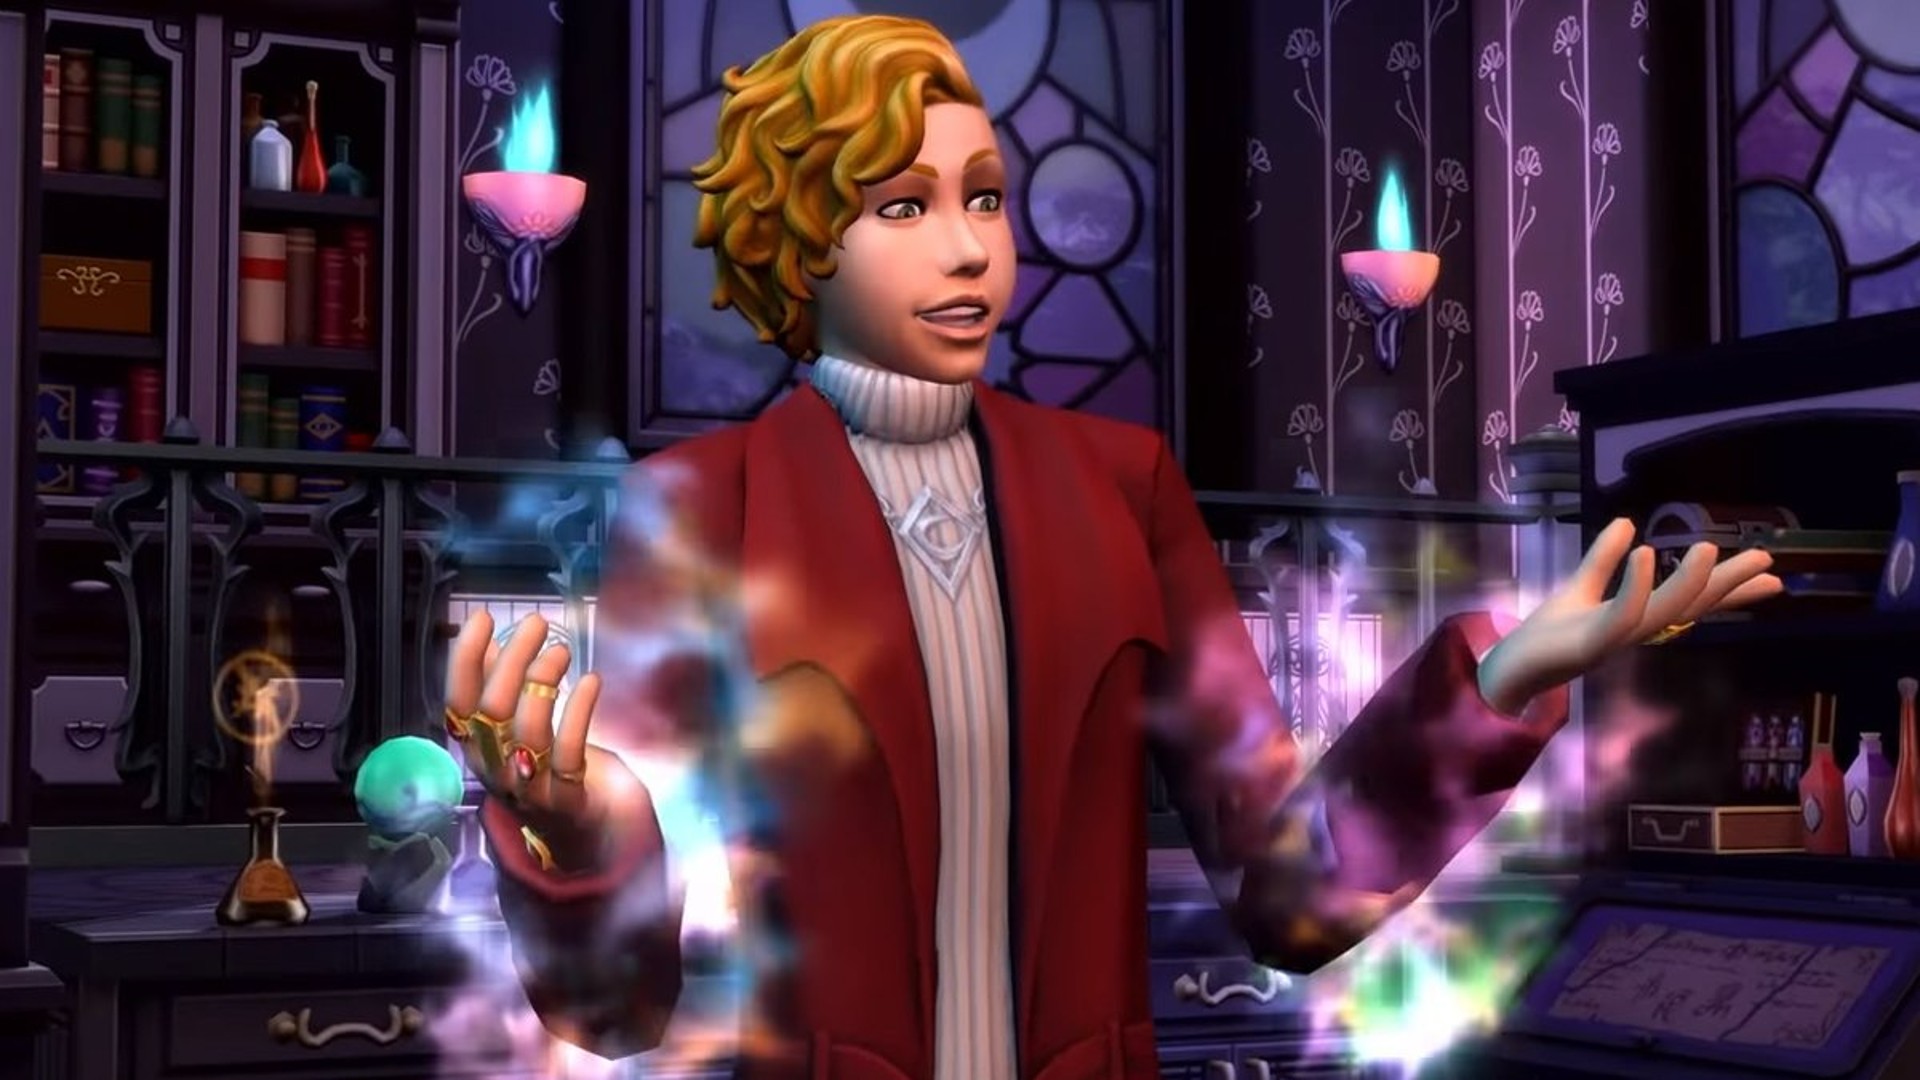 Sims 4 build adds Harry Potter-style magic mall to EA's life game